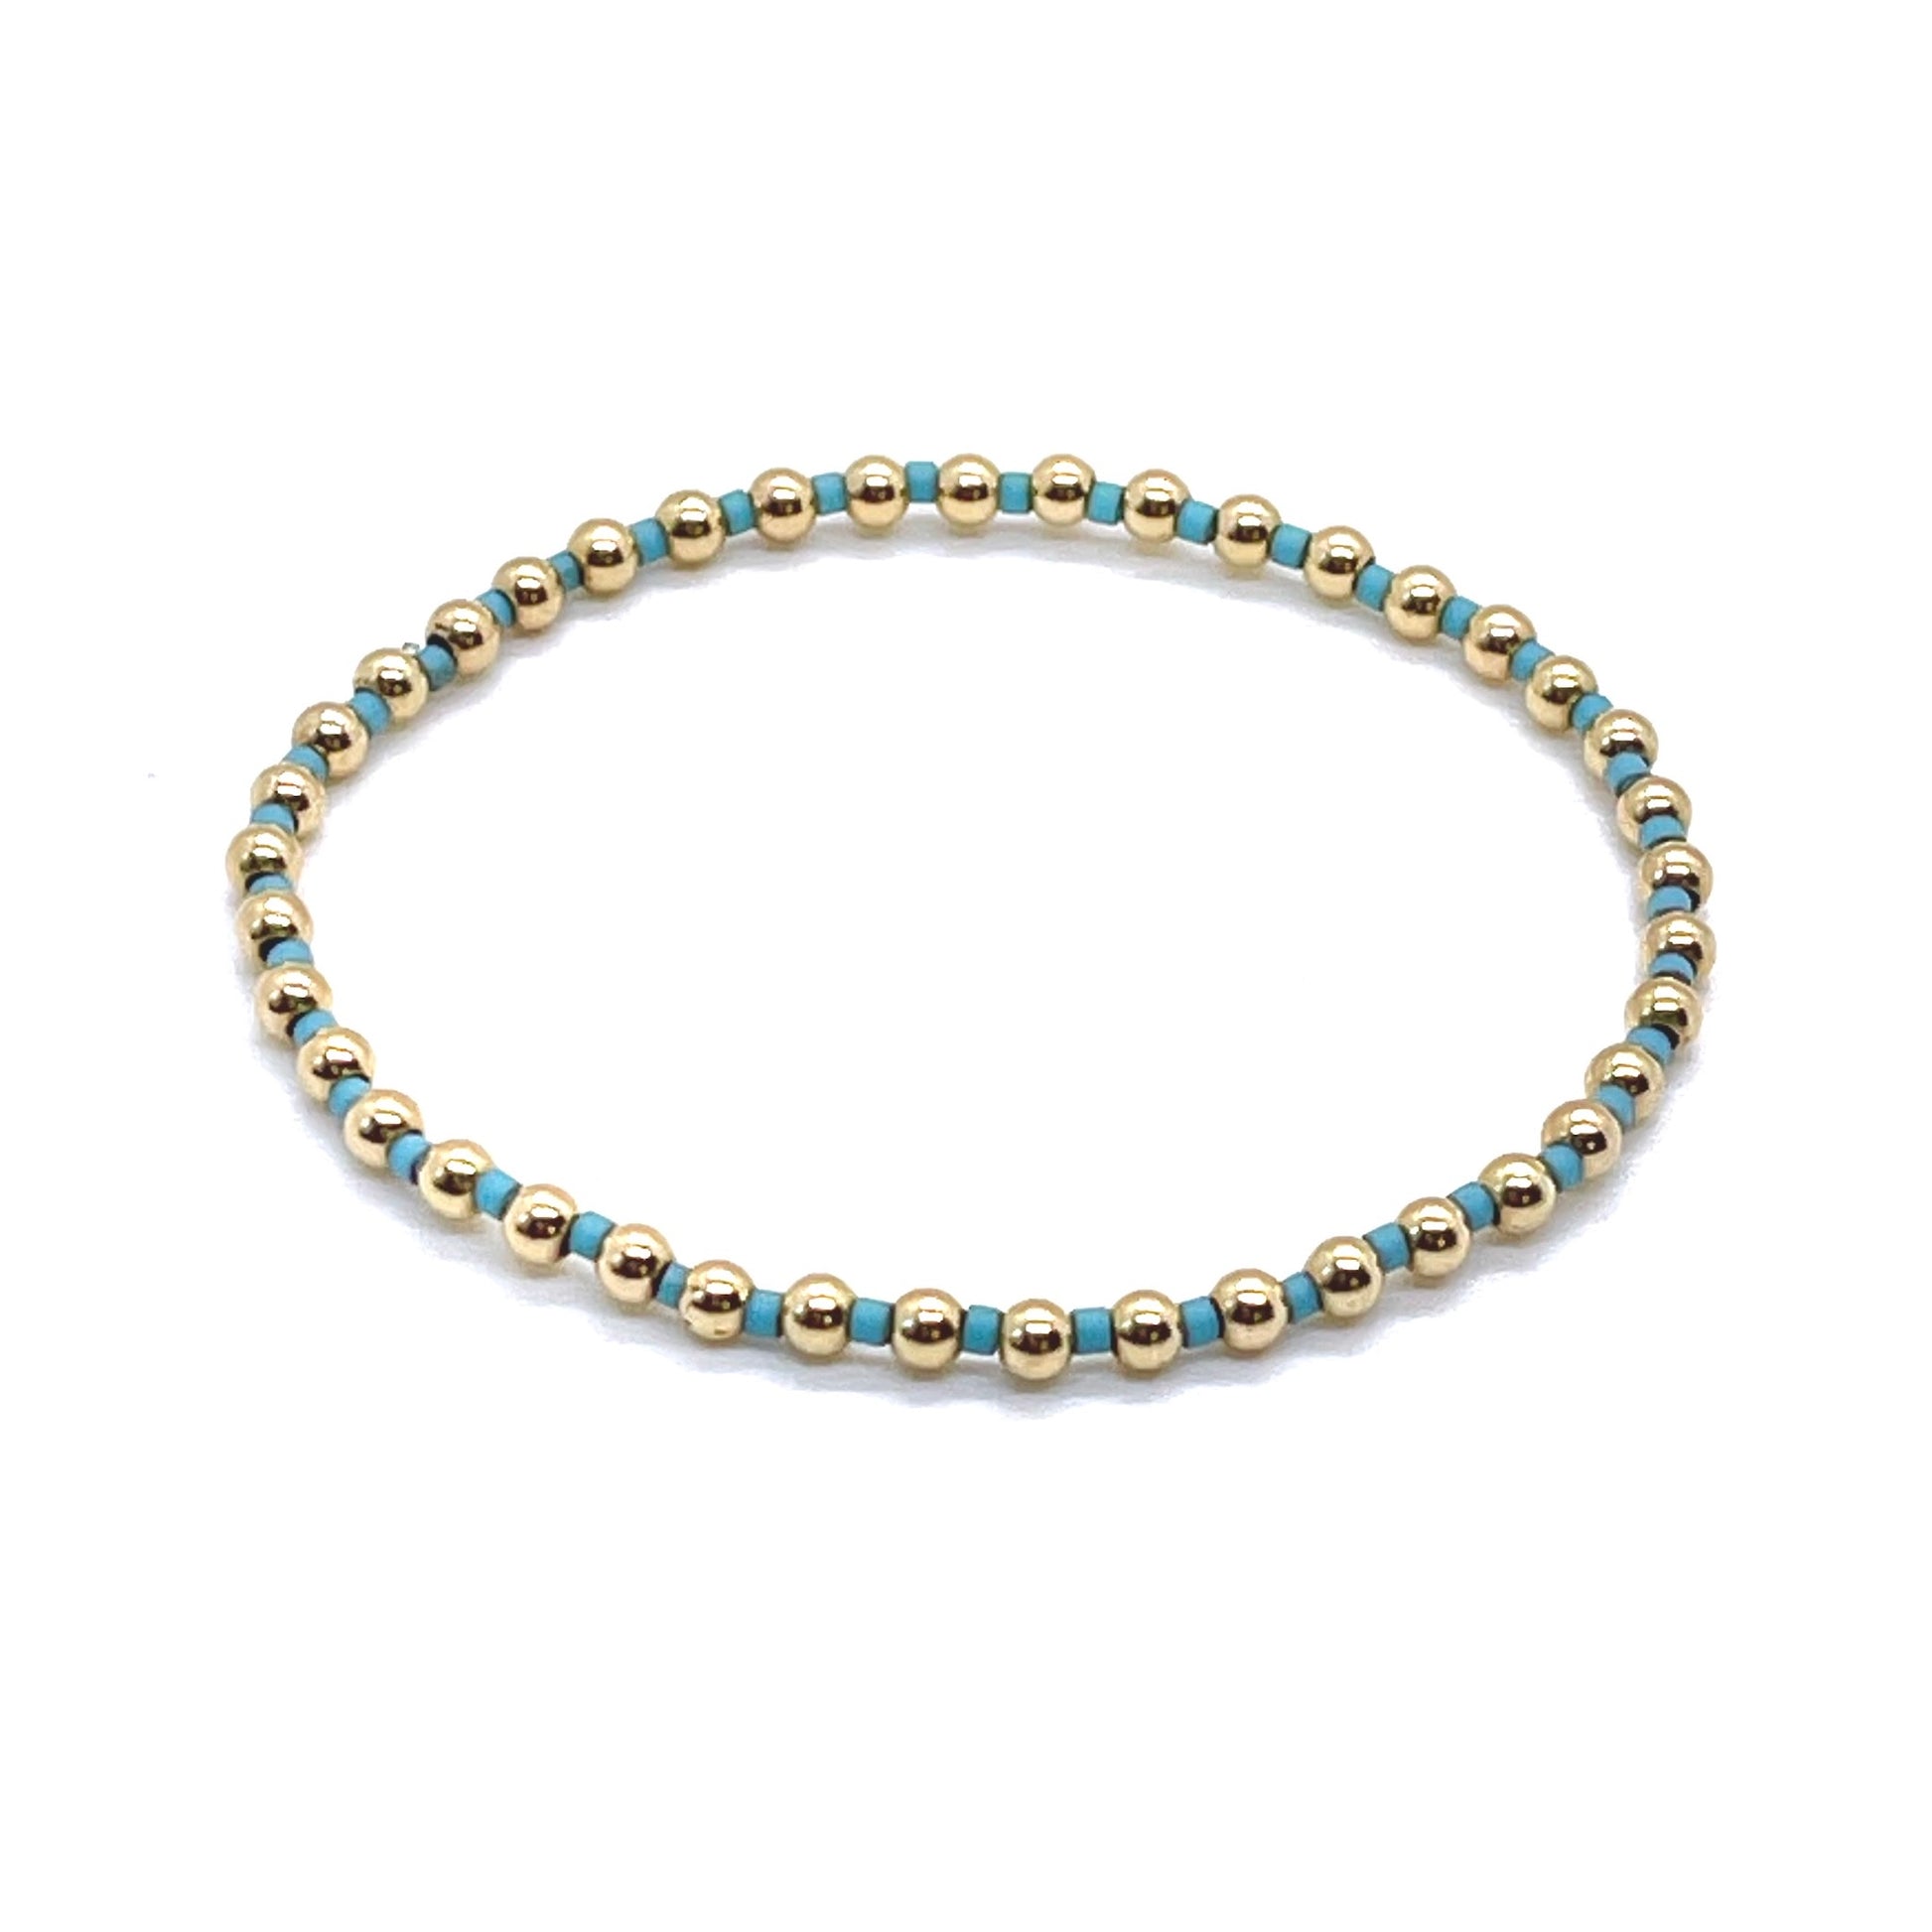 Gold bracelet for women with turquoise seed beads hand strung on elastic stretch cord.